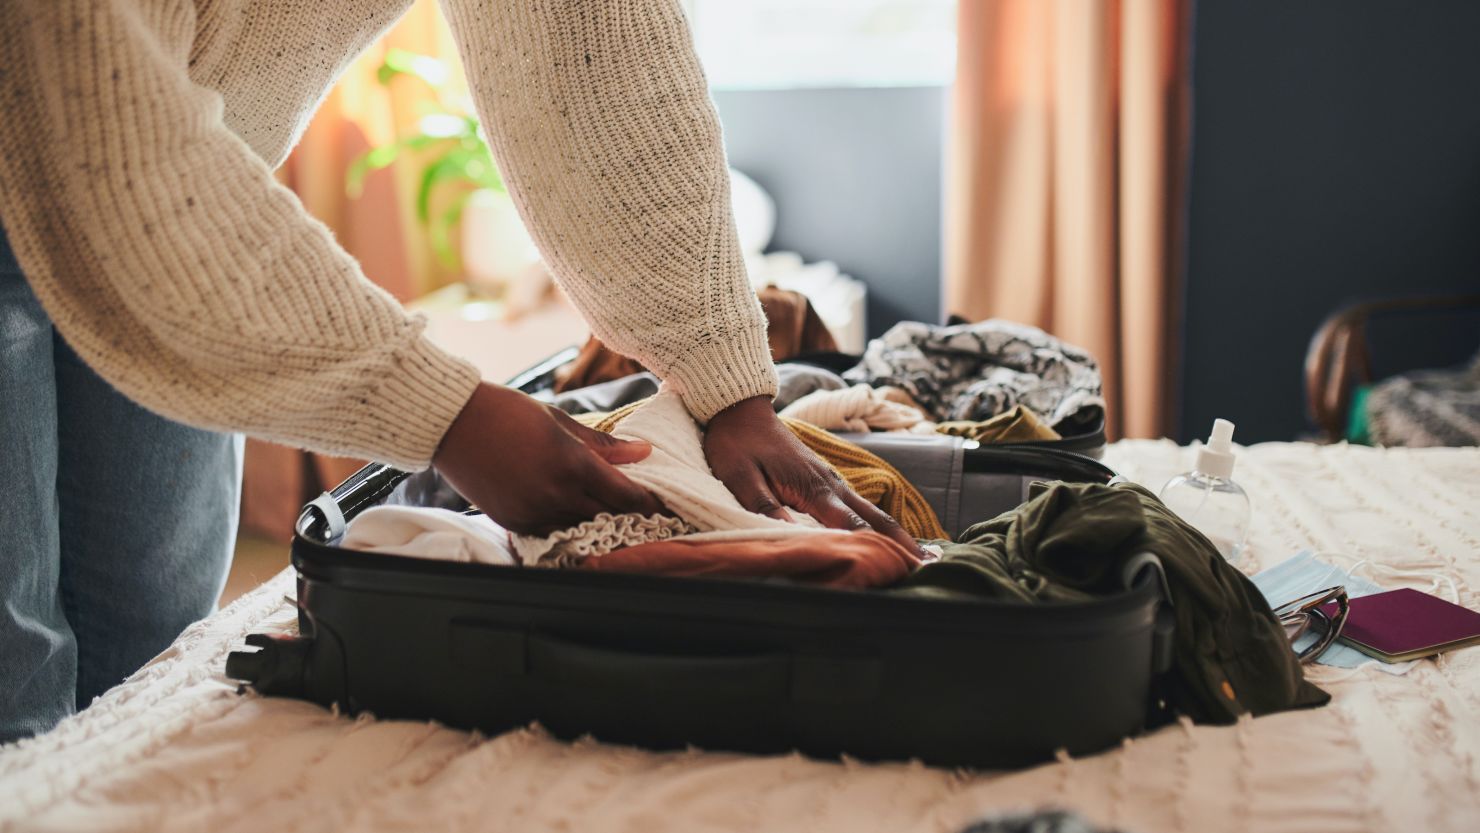 What Not to Pack in Your Carry-on, According to a Professional Packer